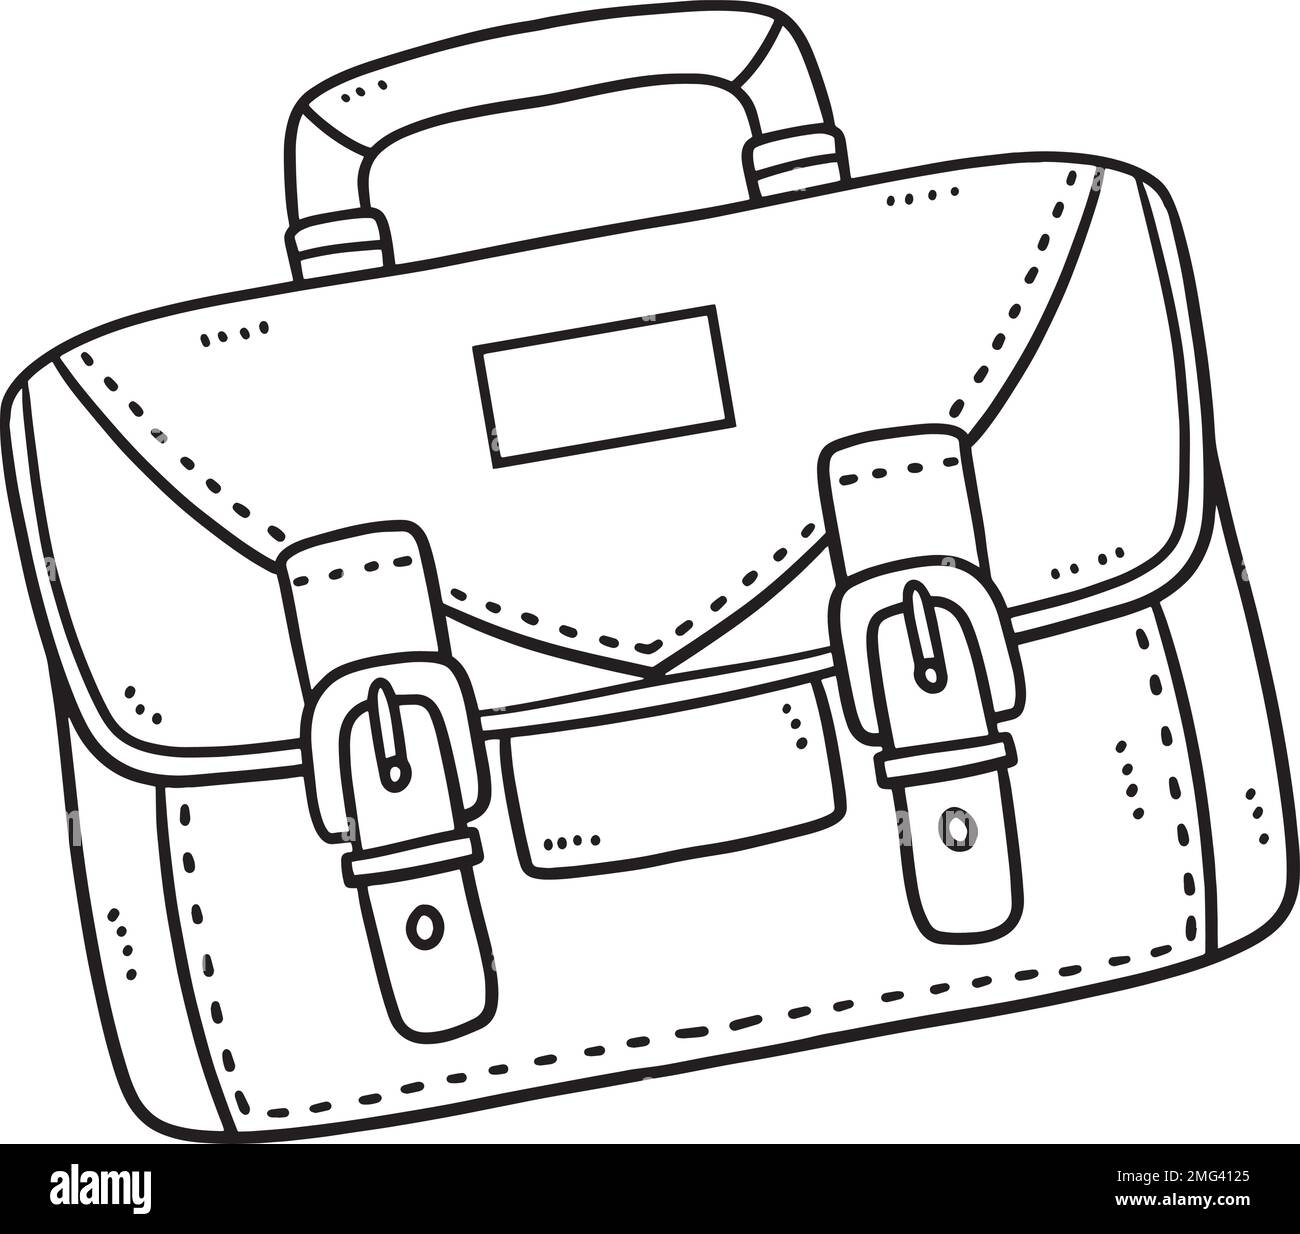 https://c8.alamy.com/comp/2MG4125/briefcase-isolated-coloring-page-for-kids-2MG4125.jpg